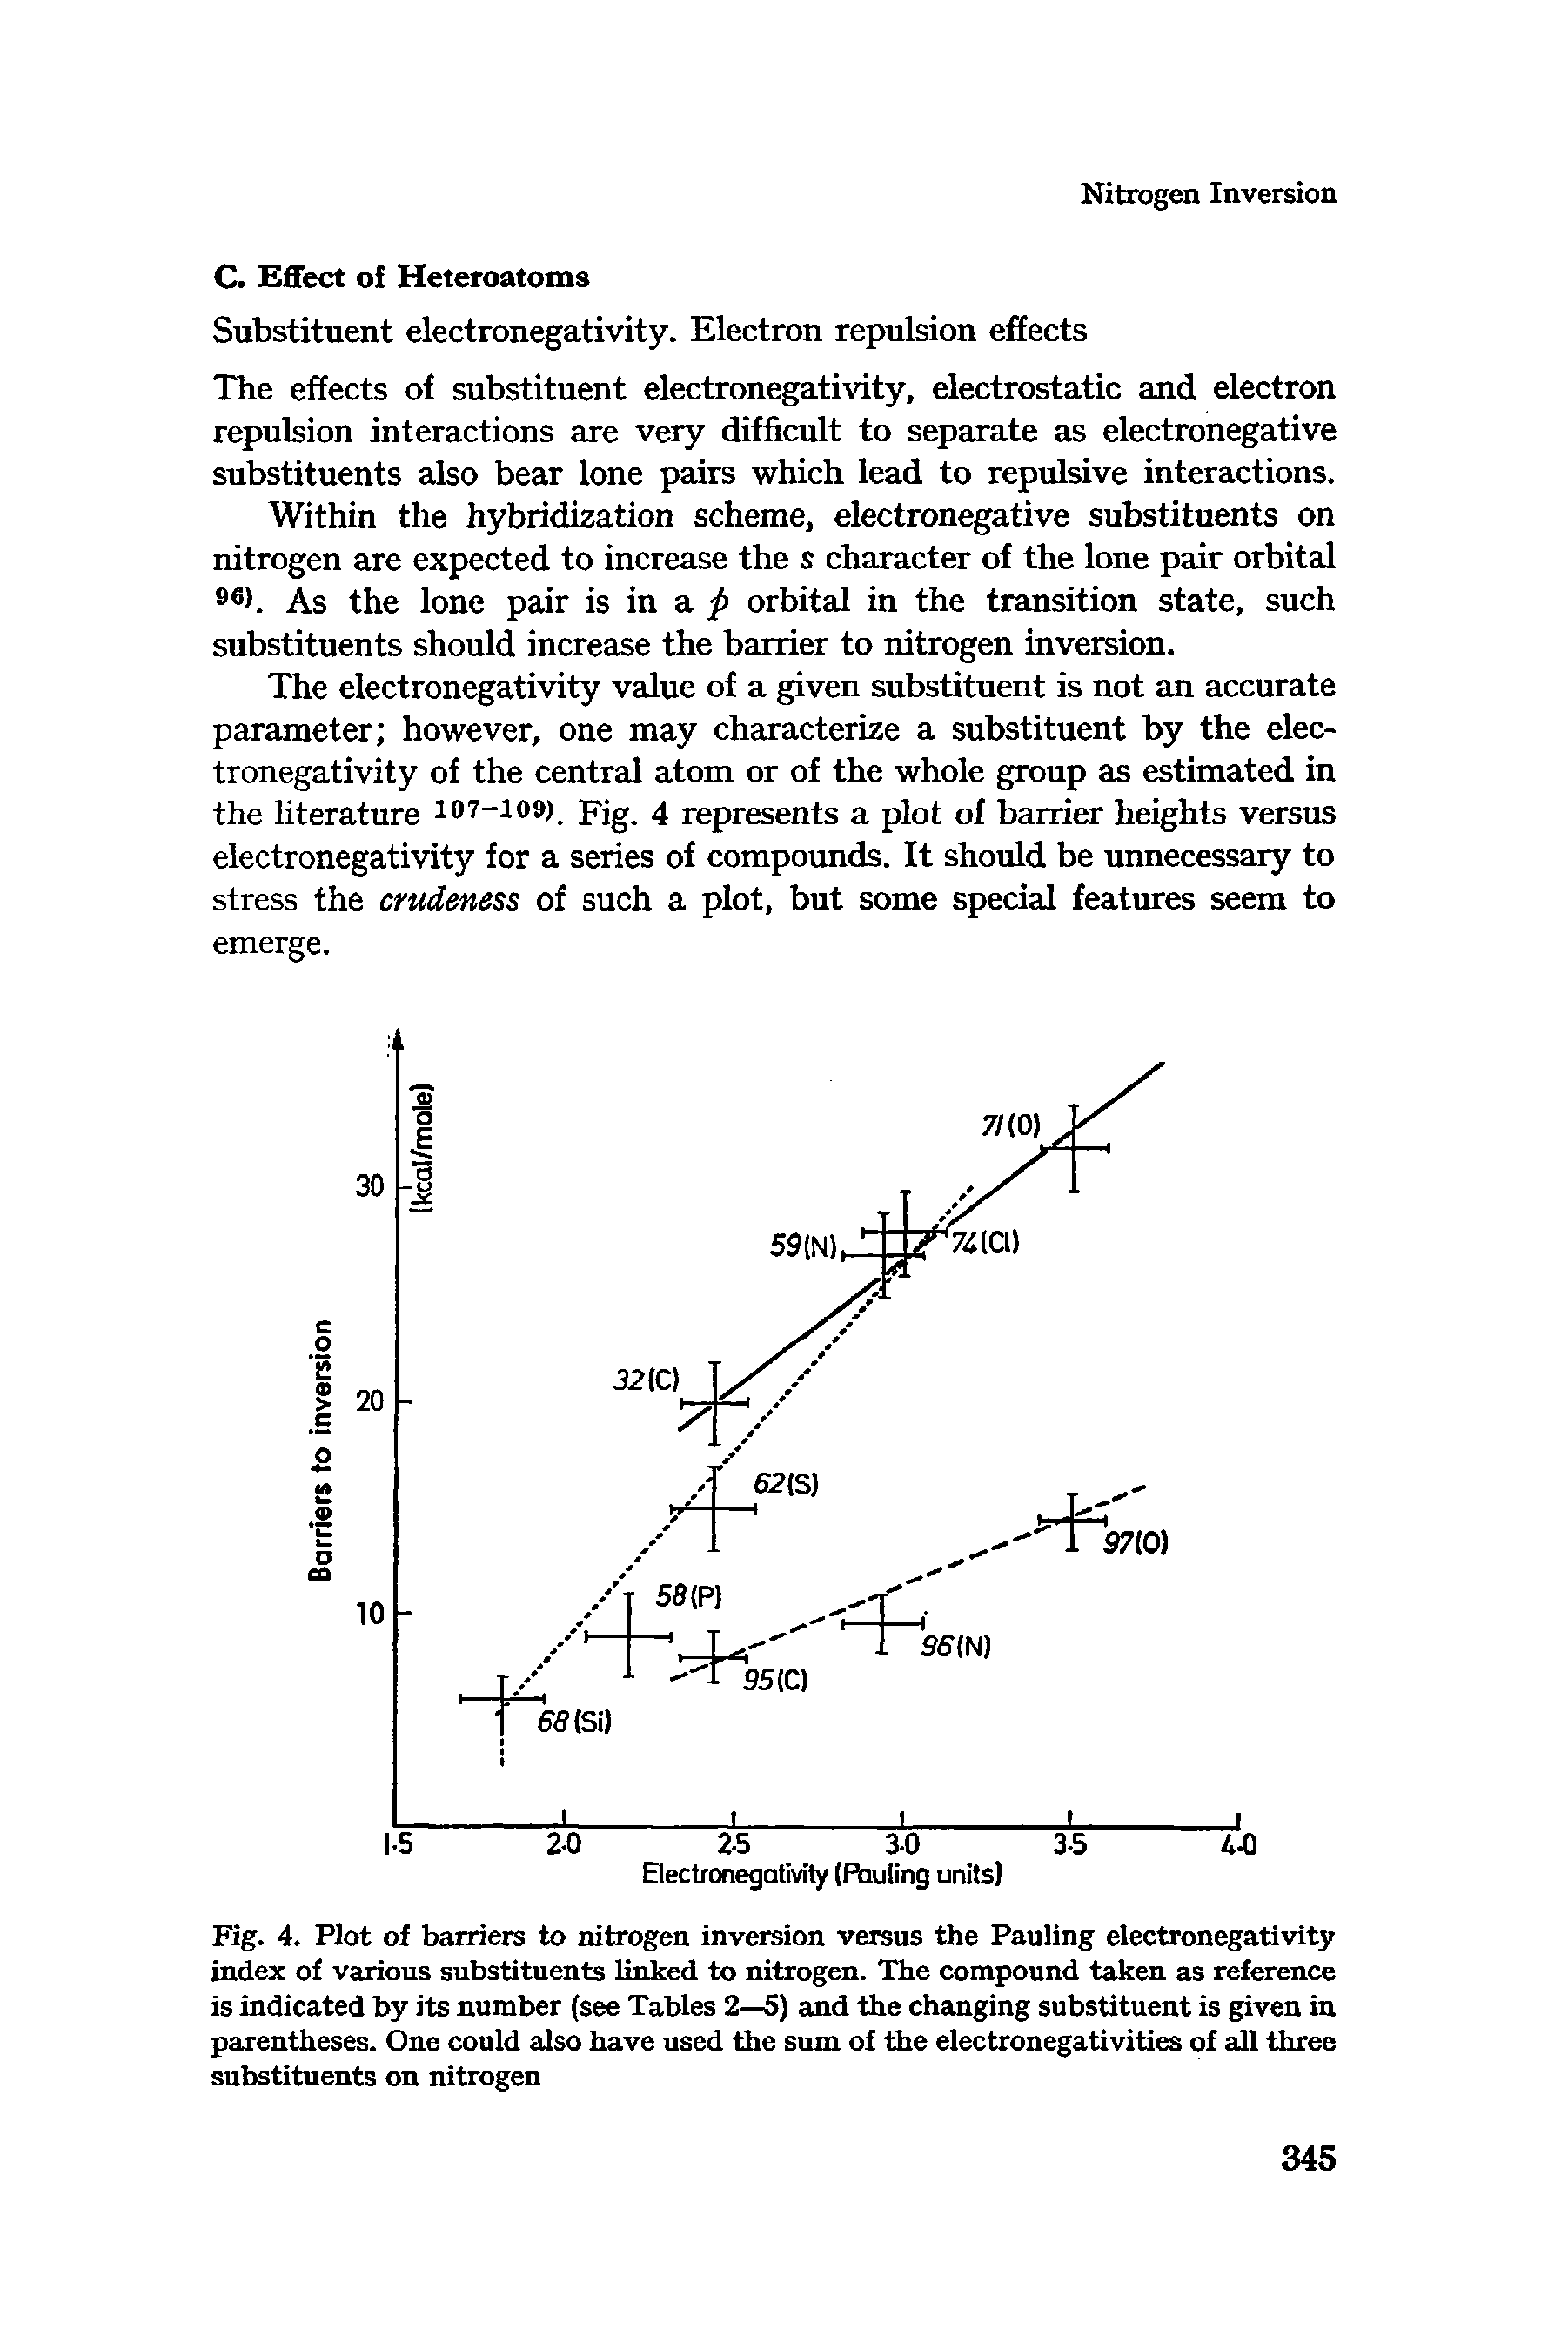 Fig. 4. Plot of barriers to nitrogen inversion versus the Pauling electronegativity index of various substituents linked to nitrogen. The compound taken as reference is indicated by its number (see Tables 2—5) and the changing substituent is given in parentheses. One could also have used the sum of the electronegativities of all three substituents on nitrogen...